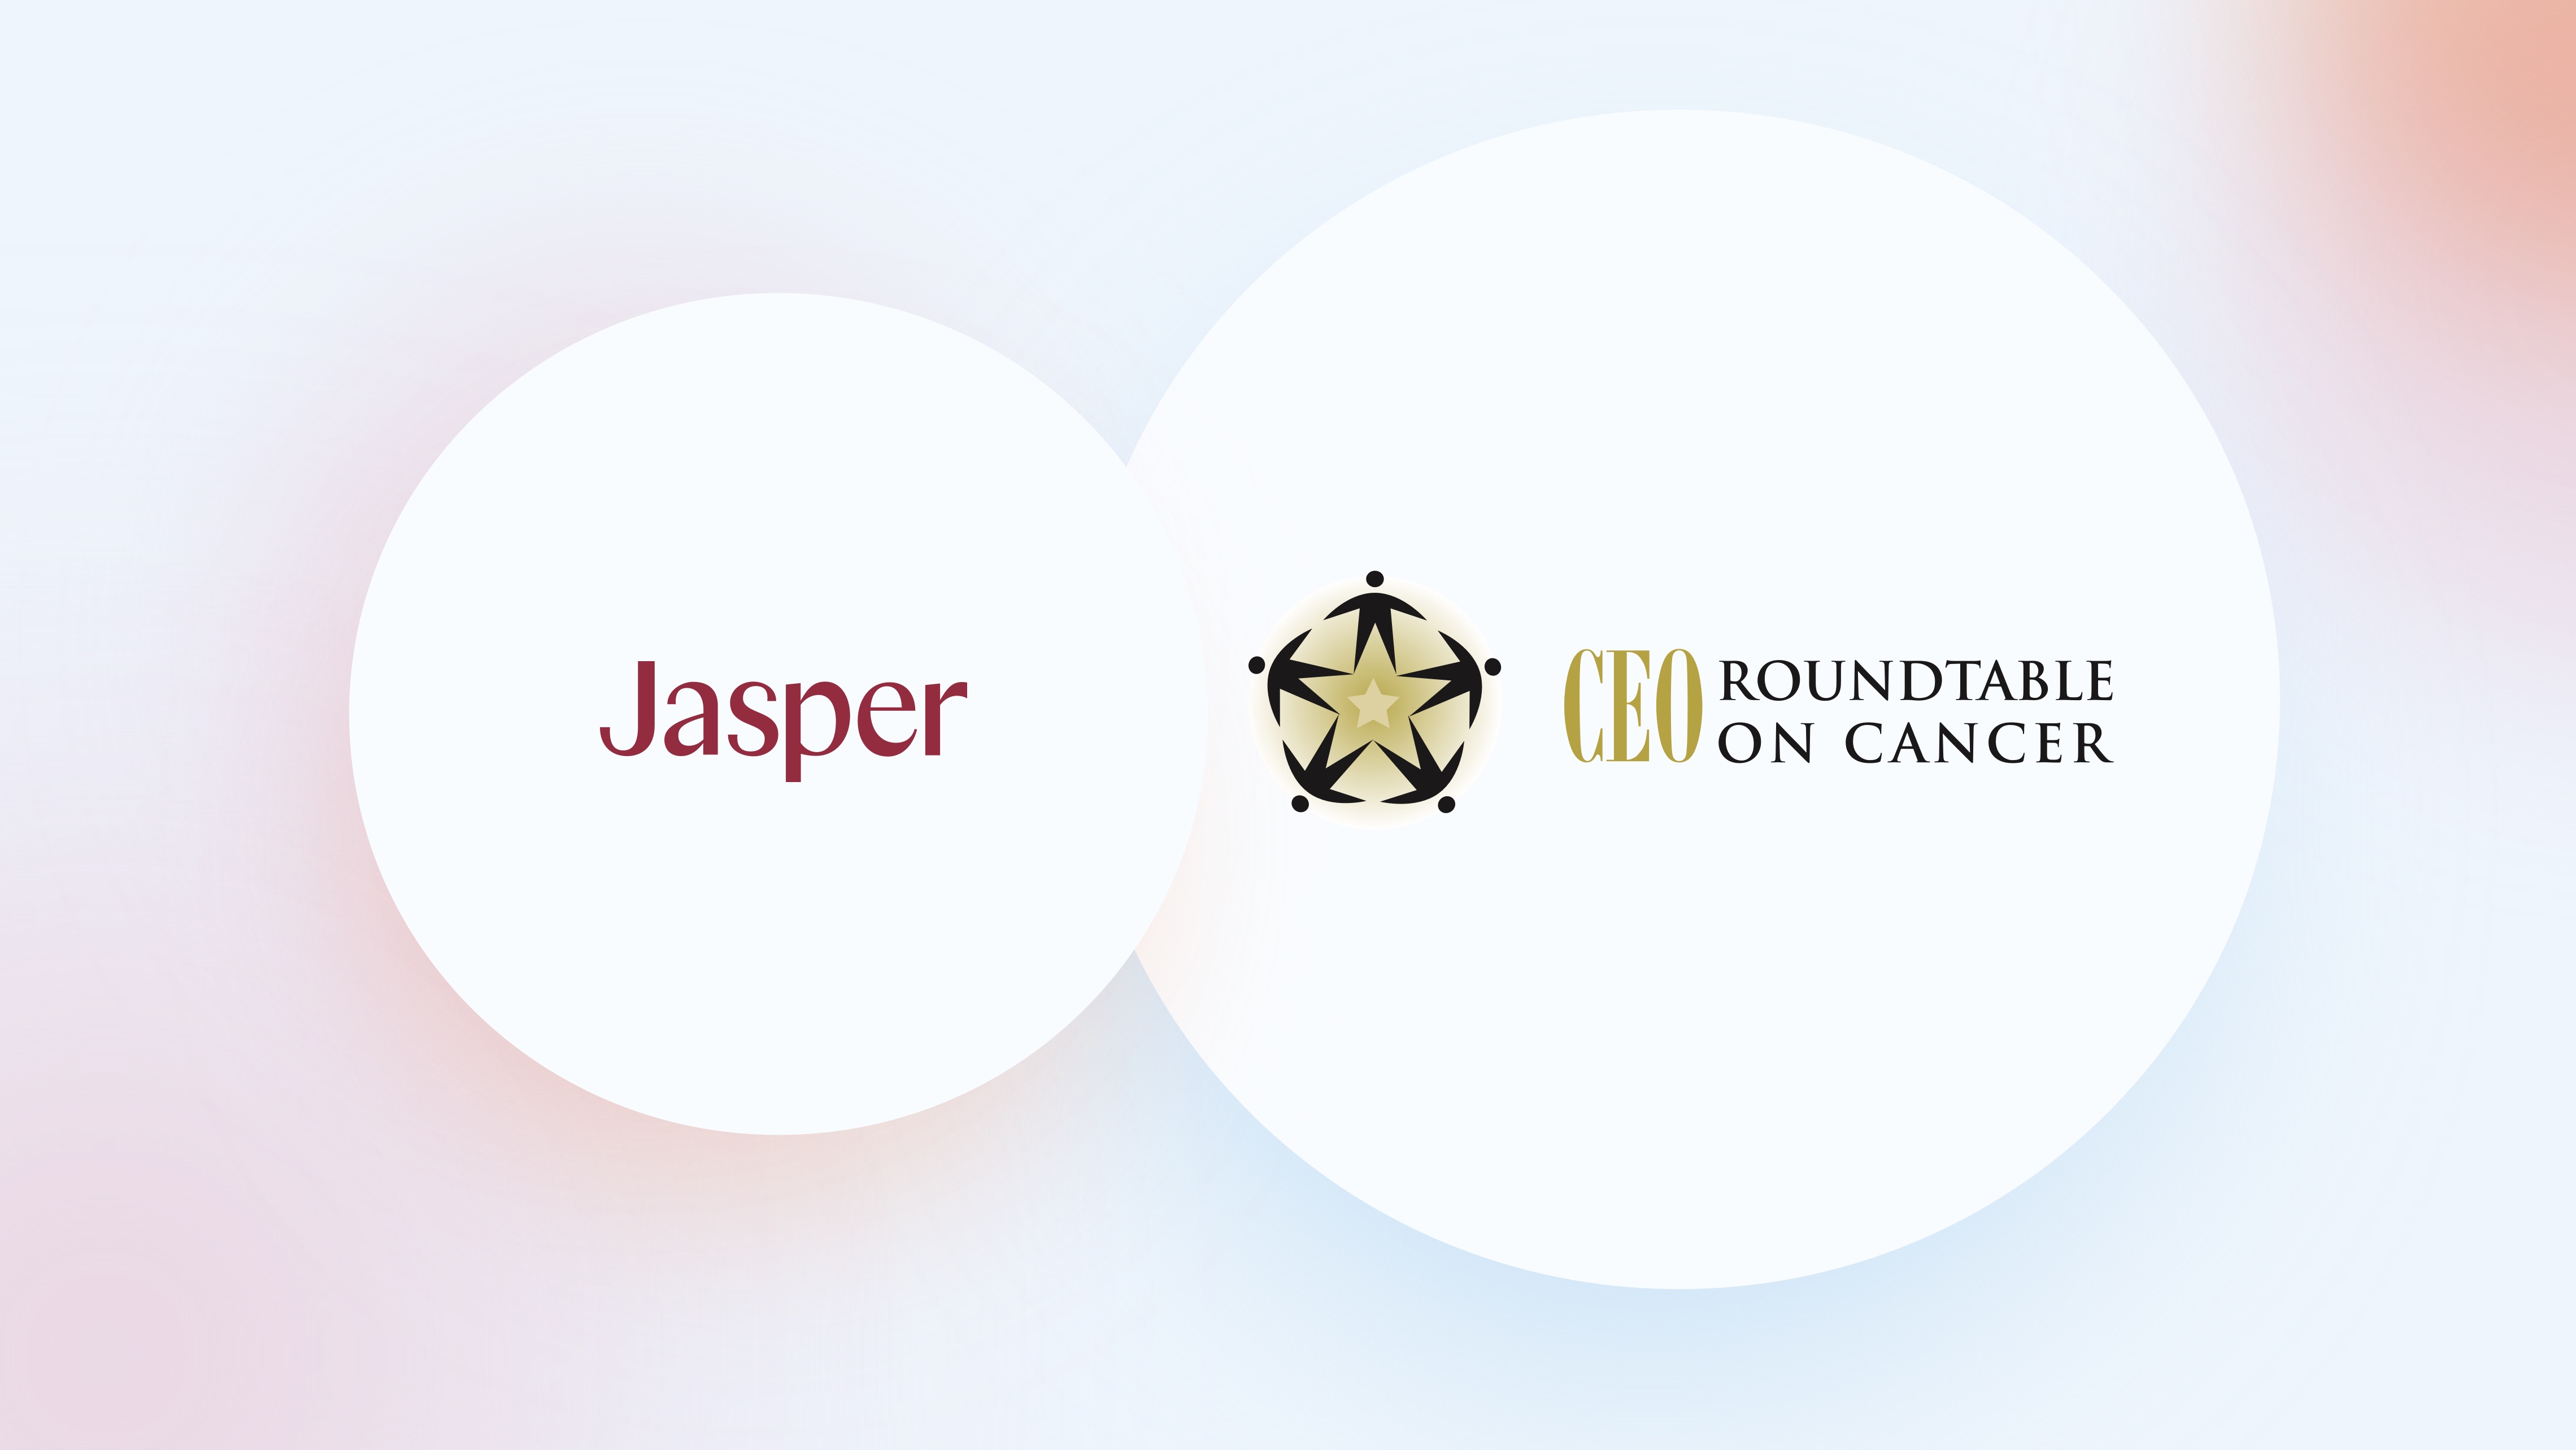 Jasper logo and CEO Roundtable of Cancer logo in two white circles